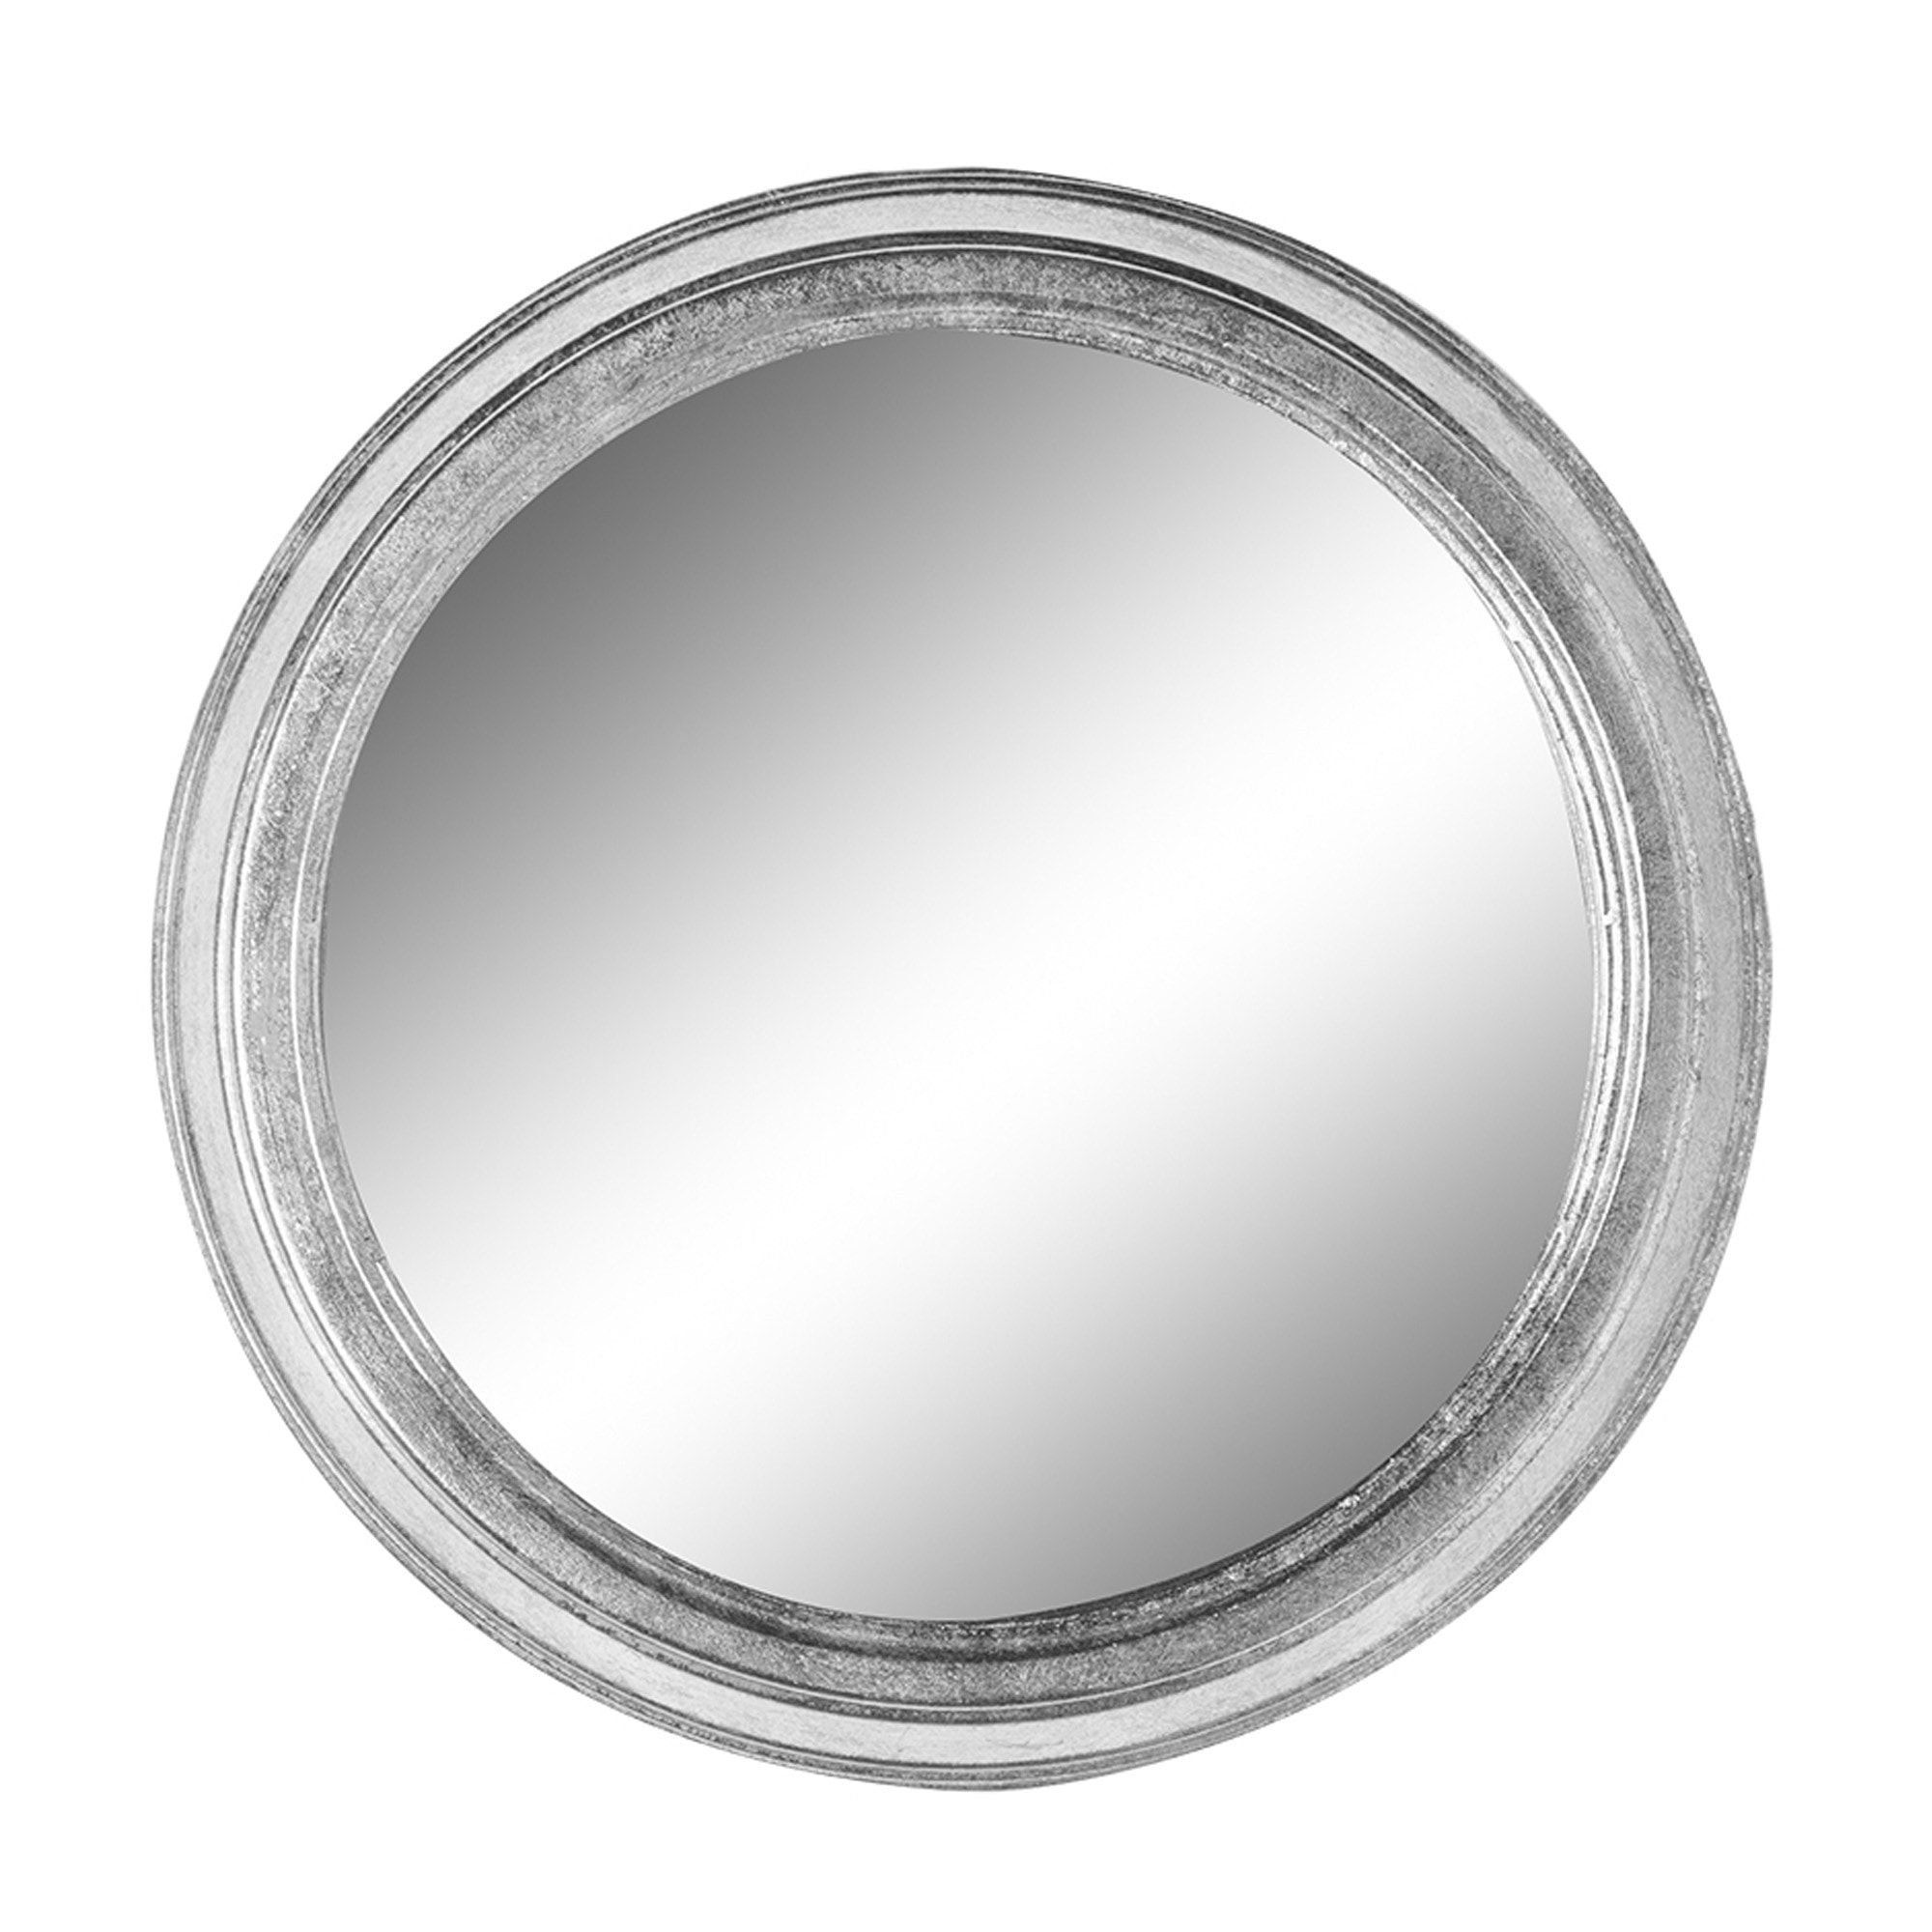 Large Silver Round Metal Wall Mirror | Wall Mirrors | Modern Mirrors In Metallic Silver Framed Wall Mirrors (View 6 of 15)